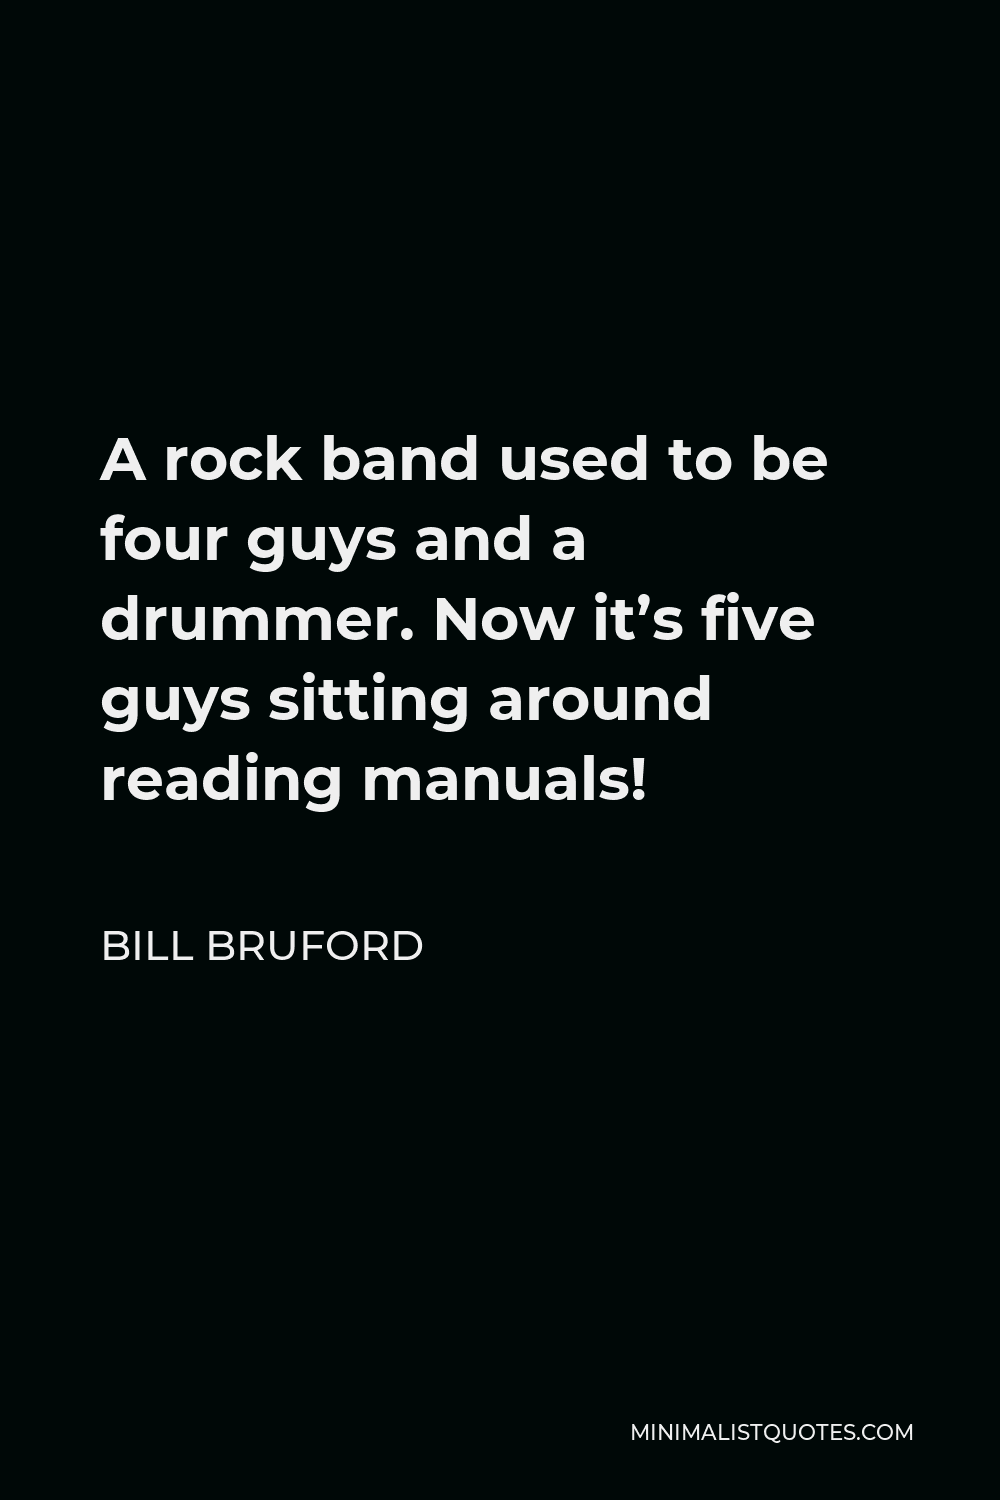 Bill Bruford Quote - A rock band used to be four guys and a drummer. Now it’s five guys sitting around reading manuals!